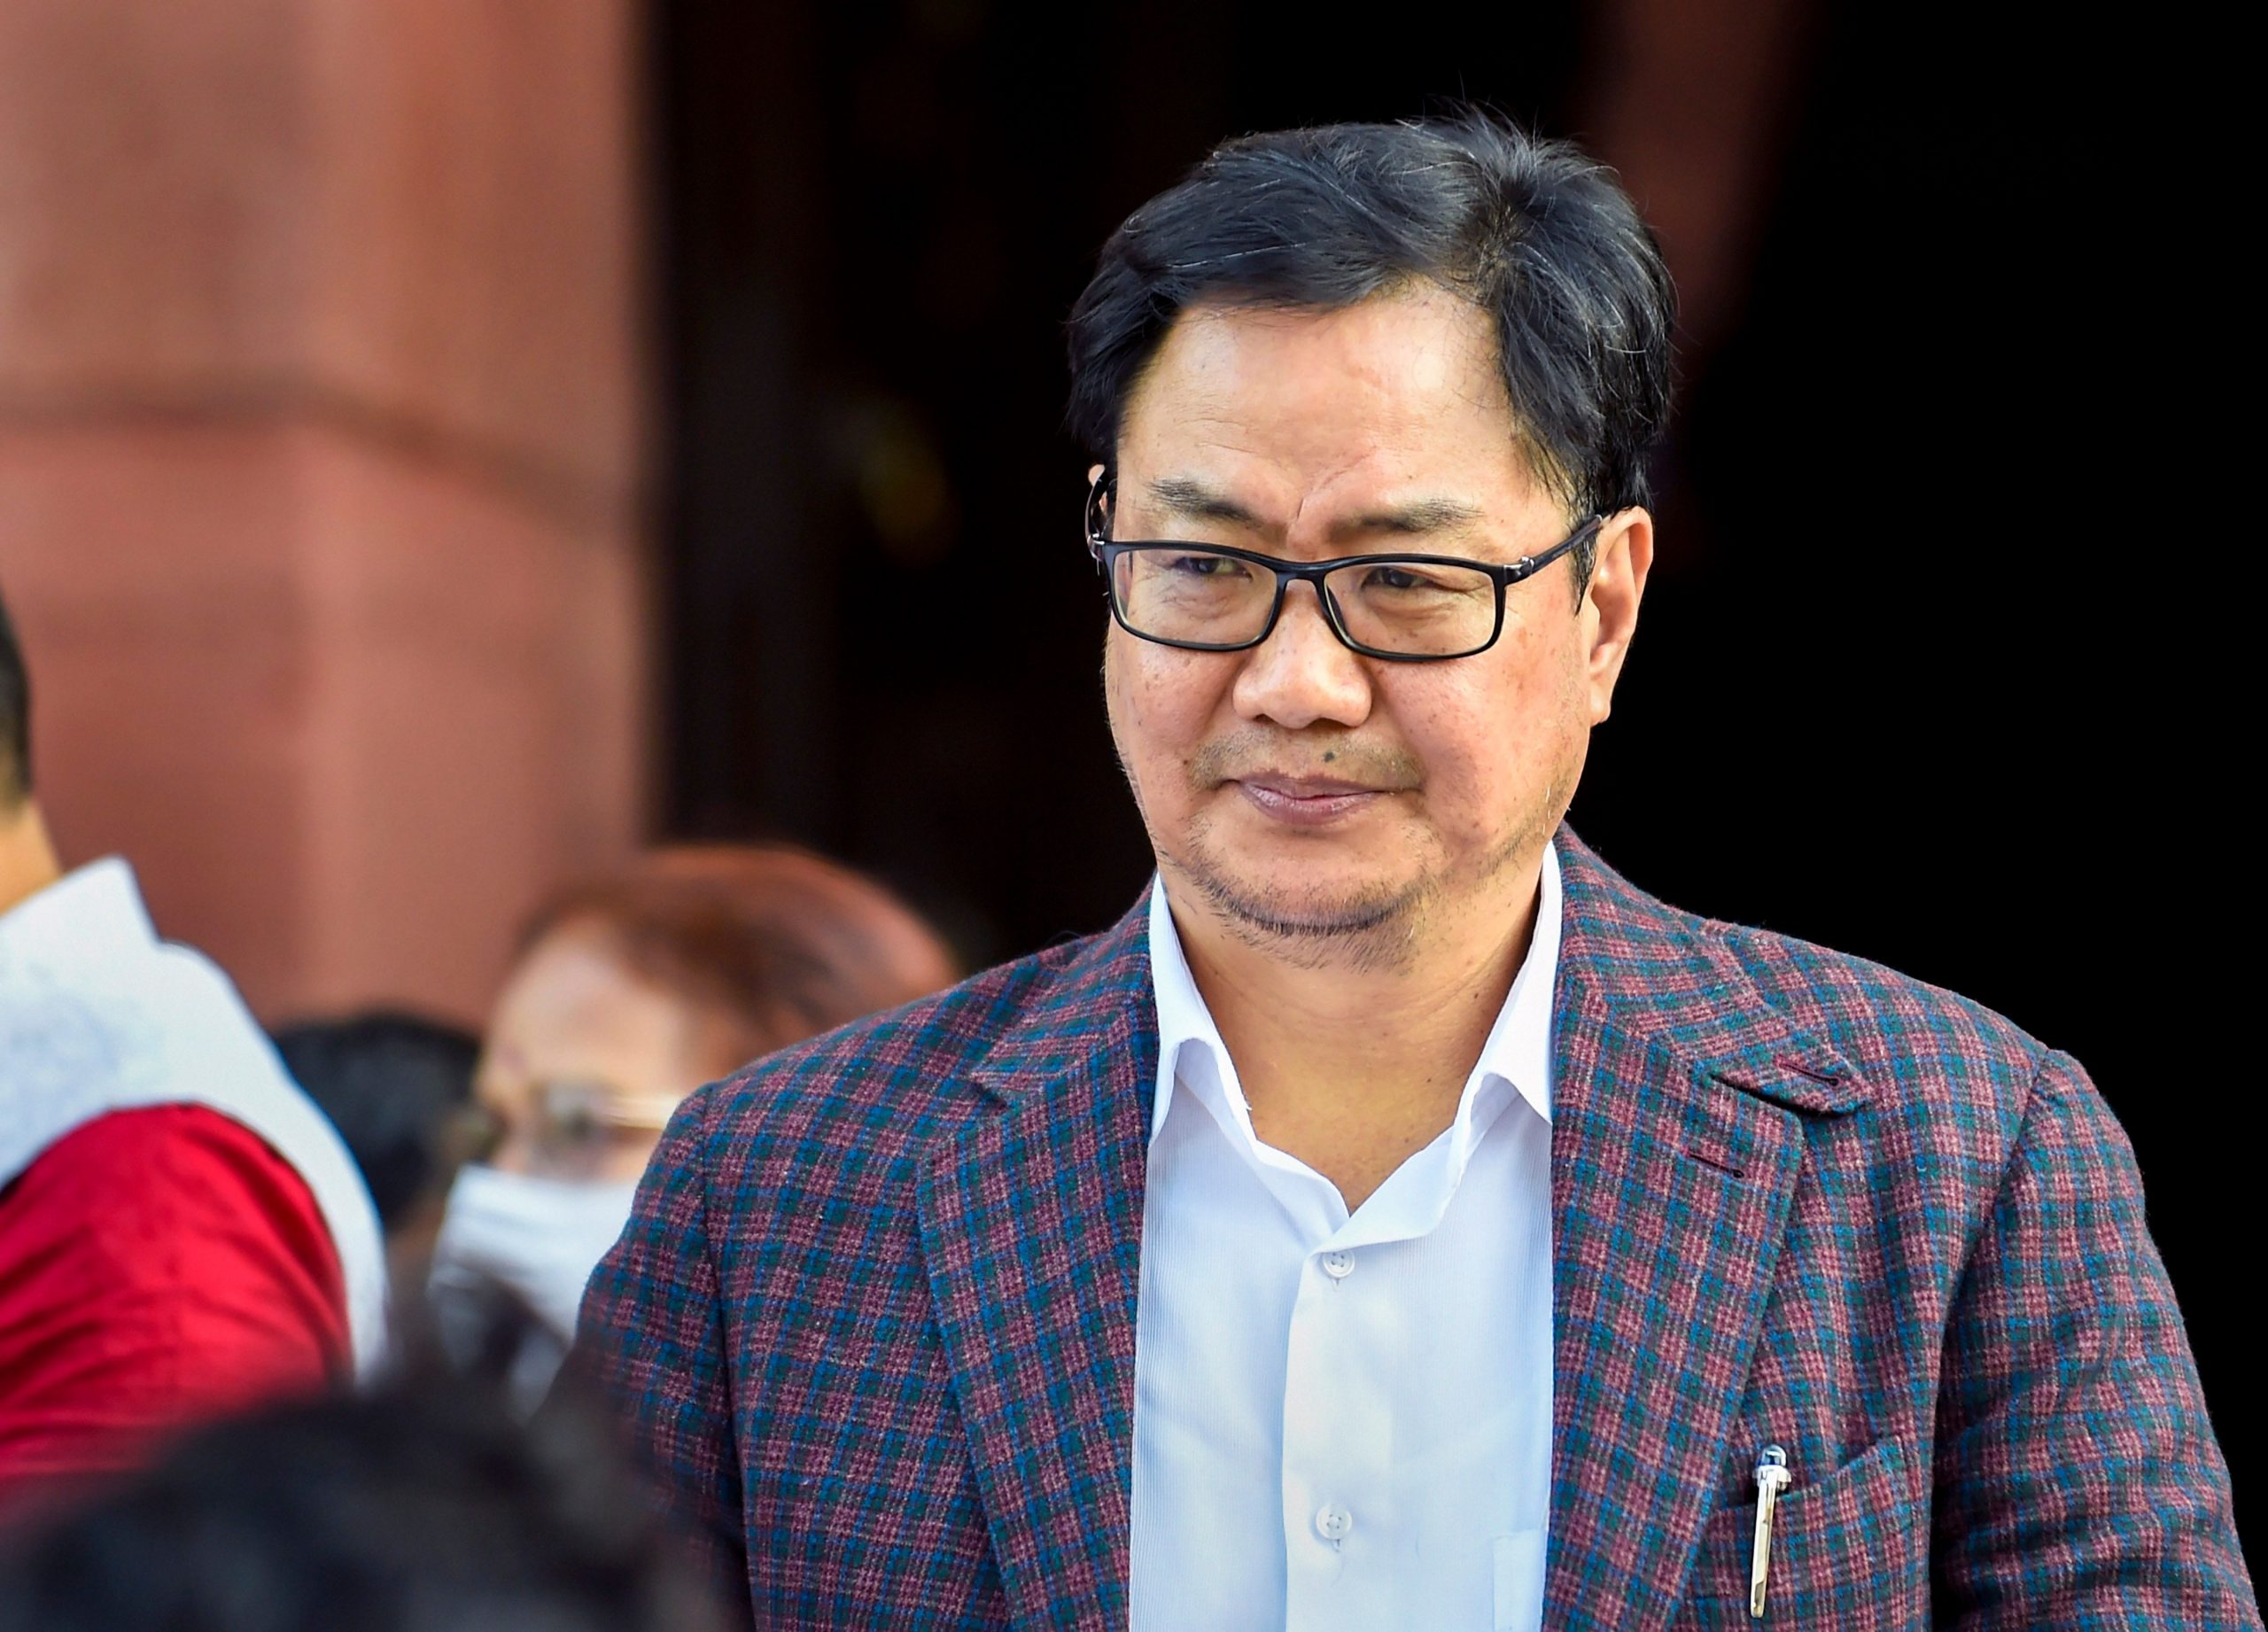 Watch: Minister Rijiju rides horse in snow as he celebrates International Mountain Day